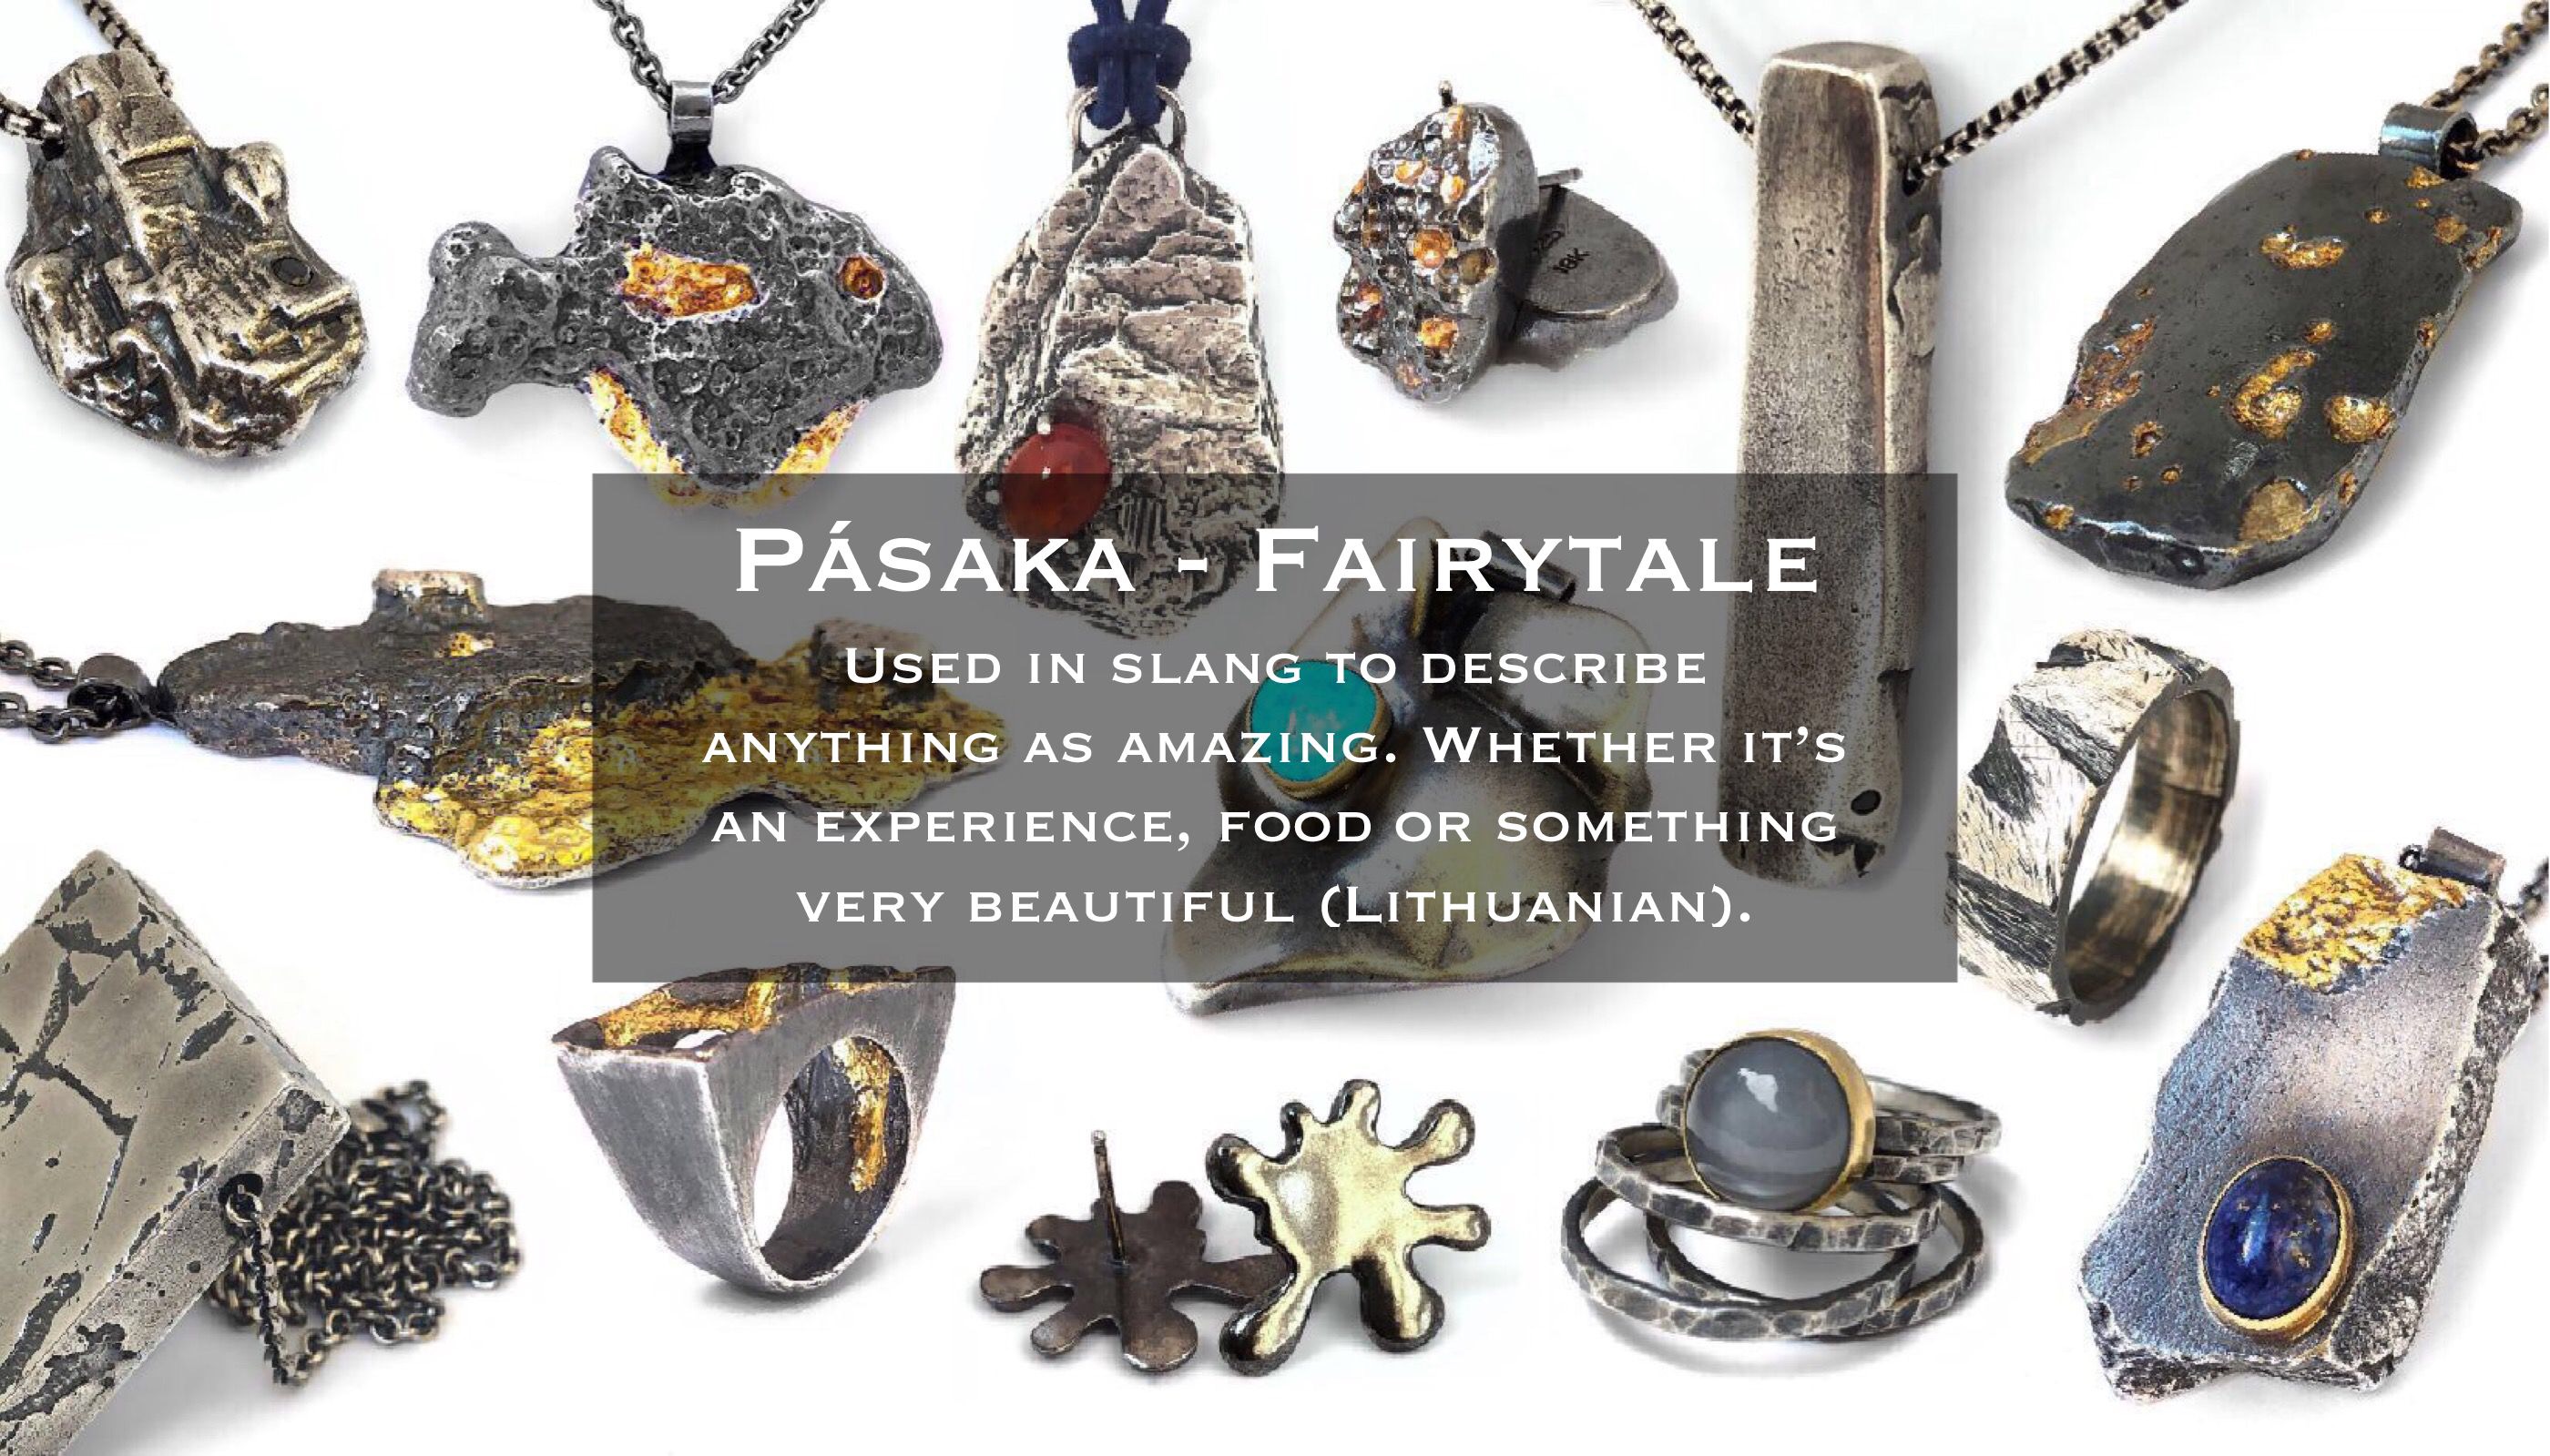 Pasaka - Fairytale. Used in slang to describe anything as amazing. Whether it’s an experience, food or something very beautiful (Lithuanian).